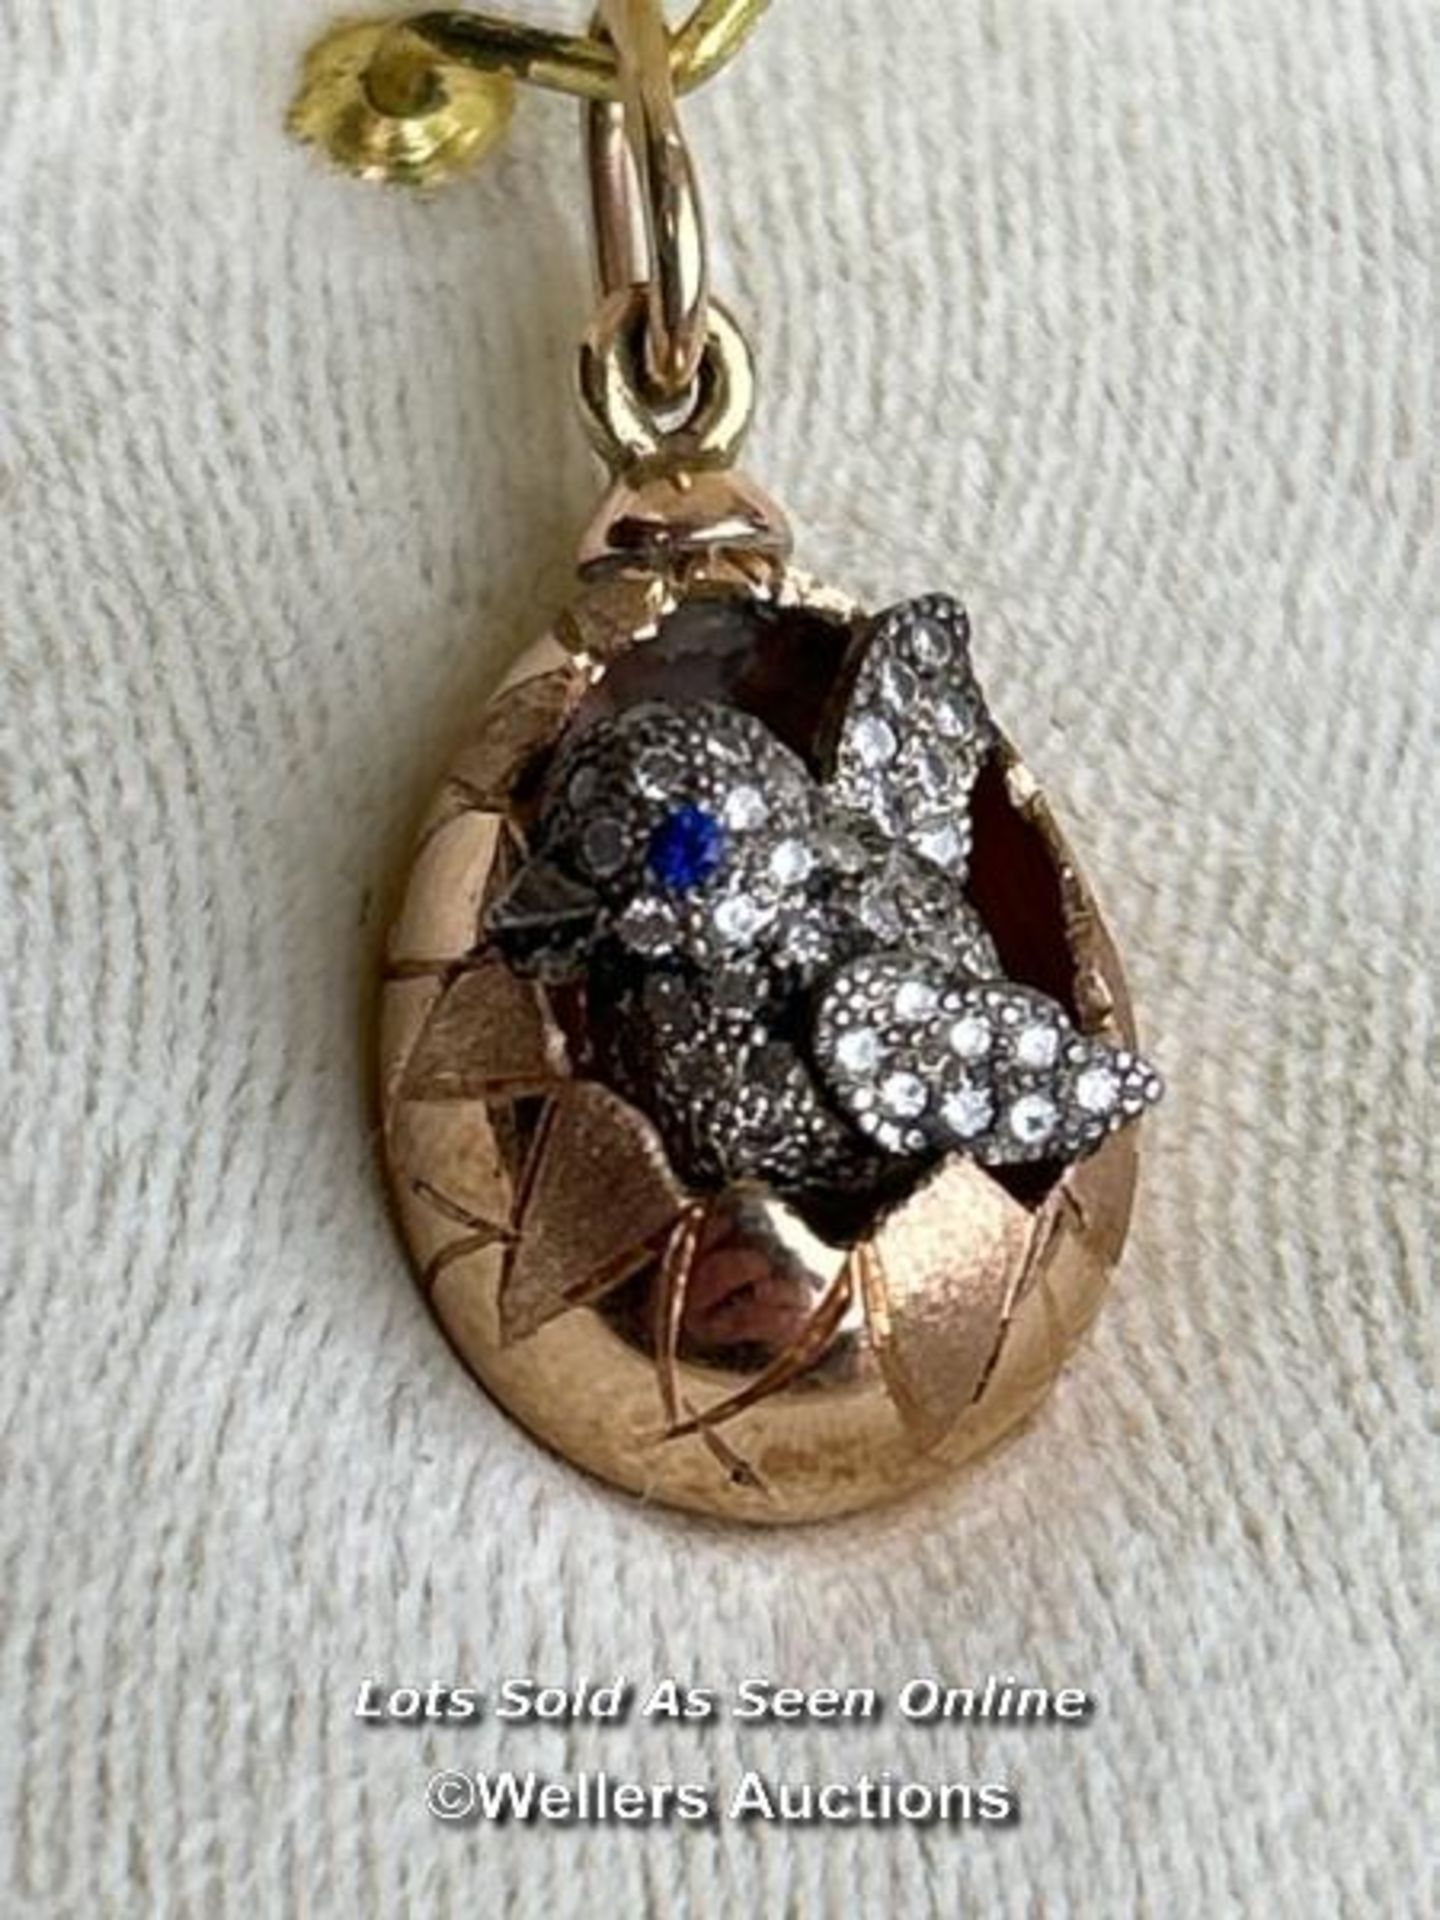 A Faberge style egg pendant with hatching diamond encrusted chick, measuring 20mm x 12mm, the loop